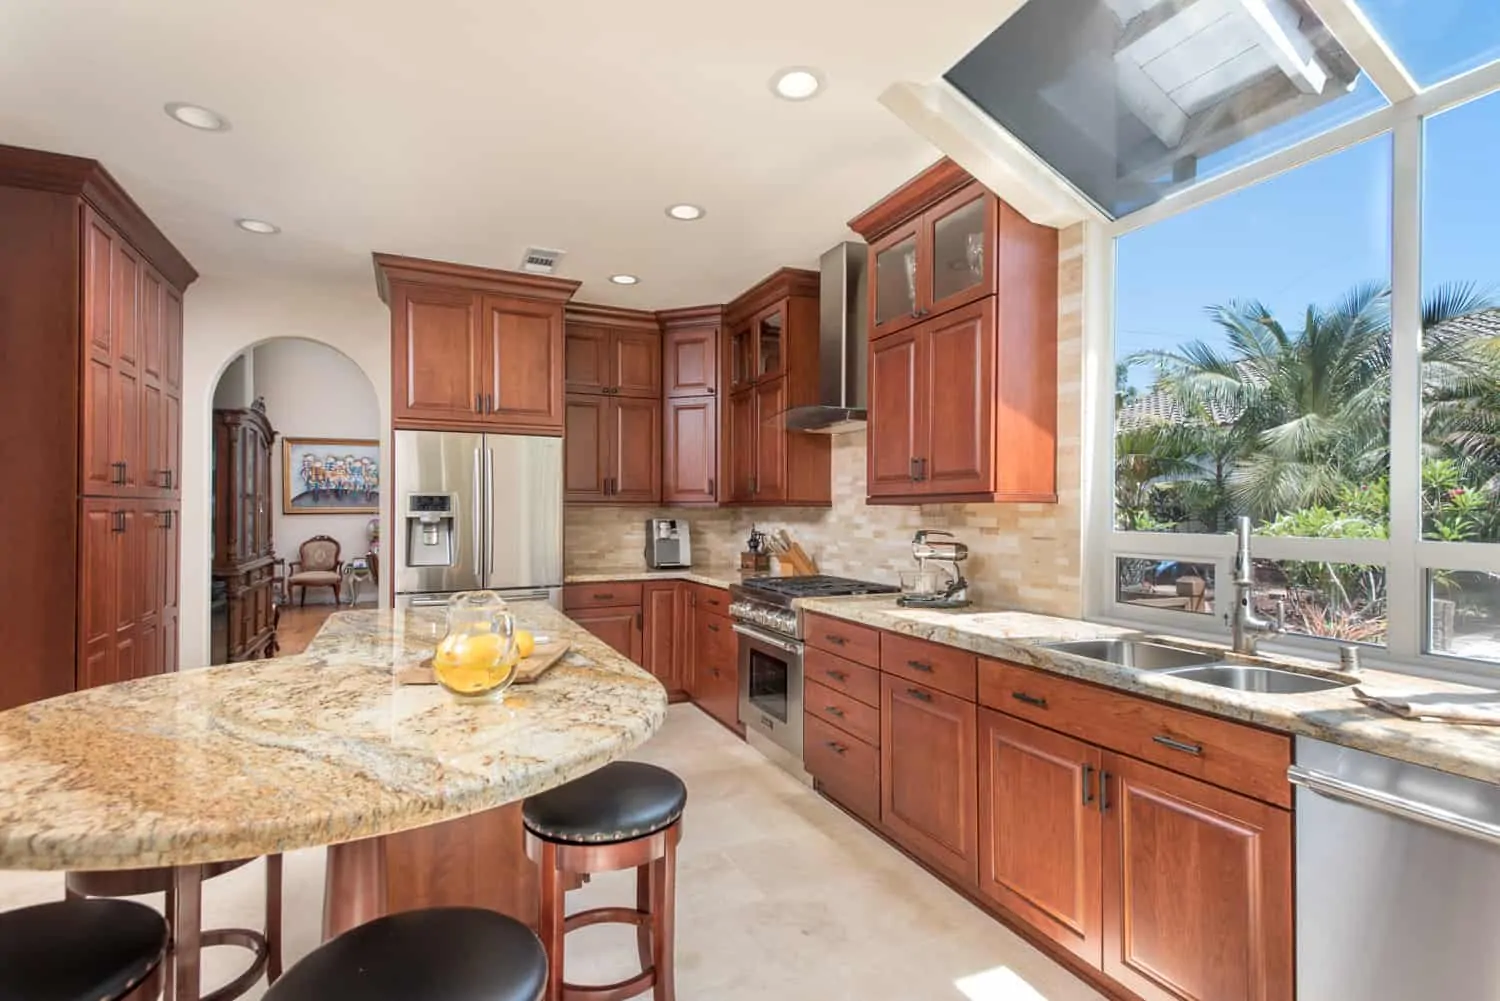 Expert kitchen remodelers near me in San Diego